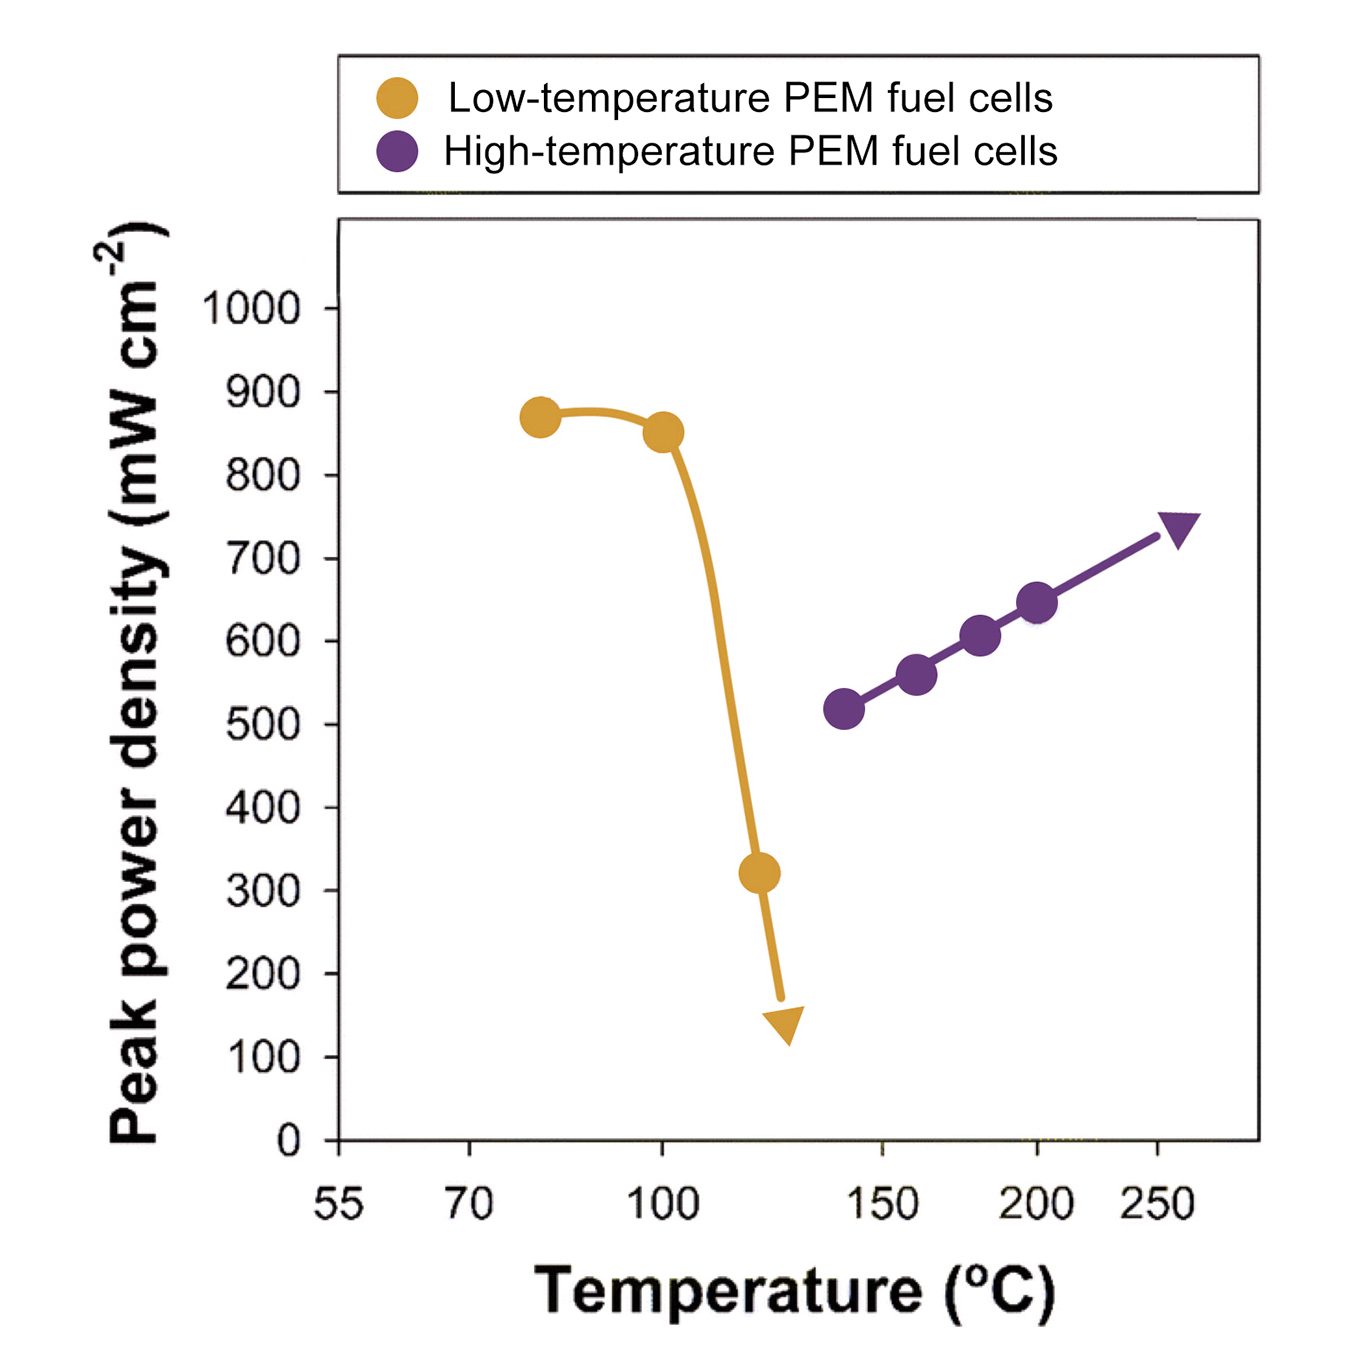 The high-temperature fuel cell membranes developed at LSU show great promise.